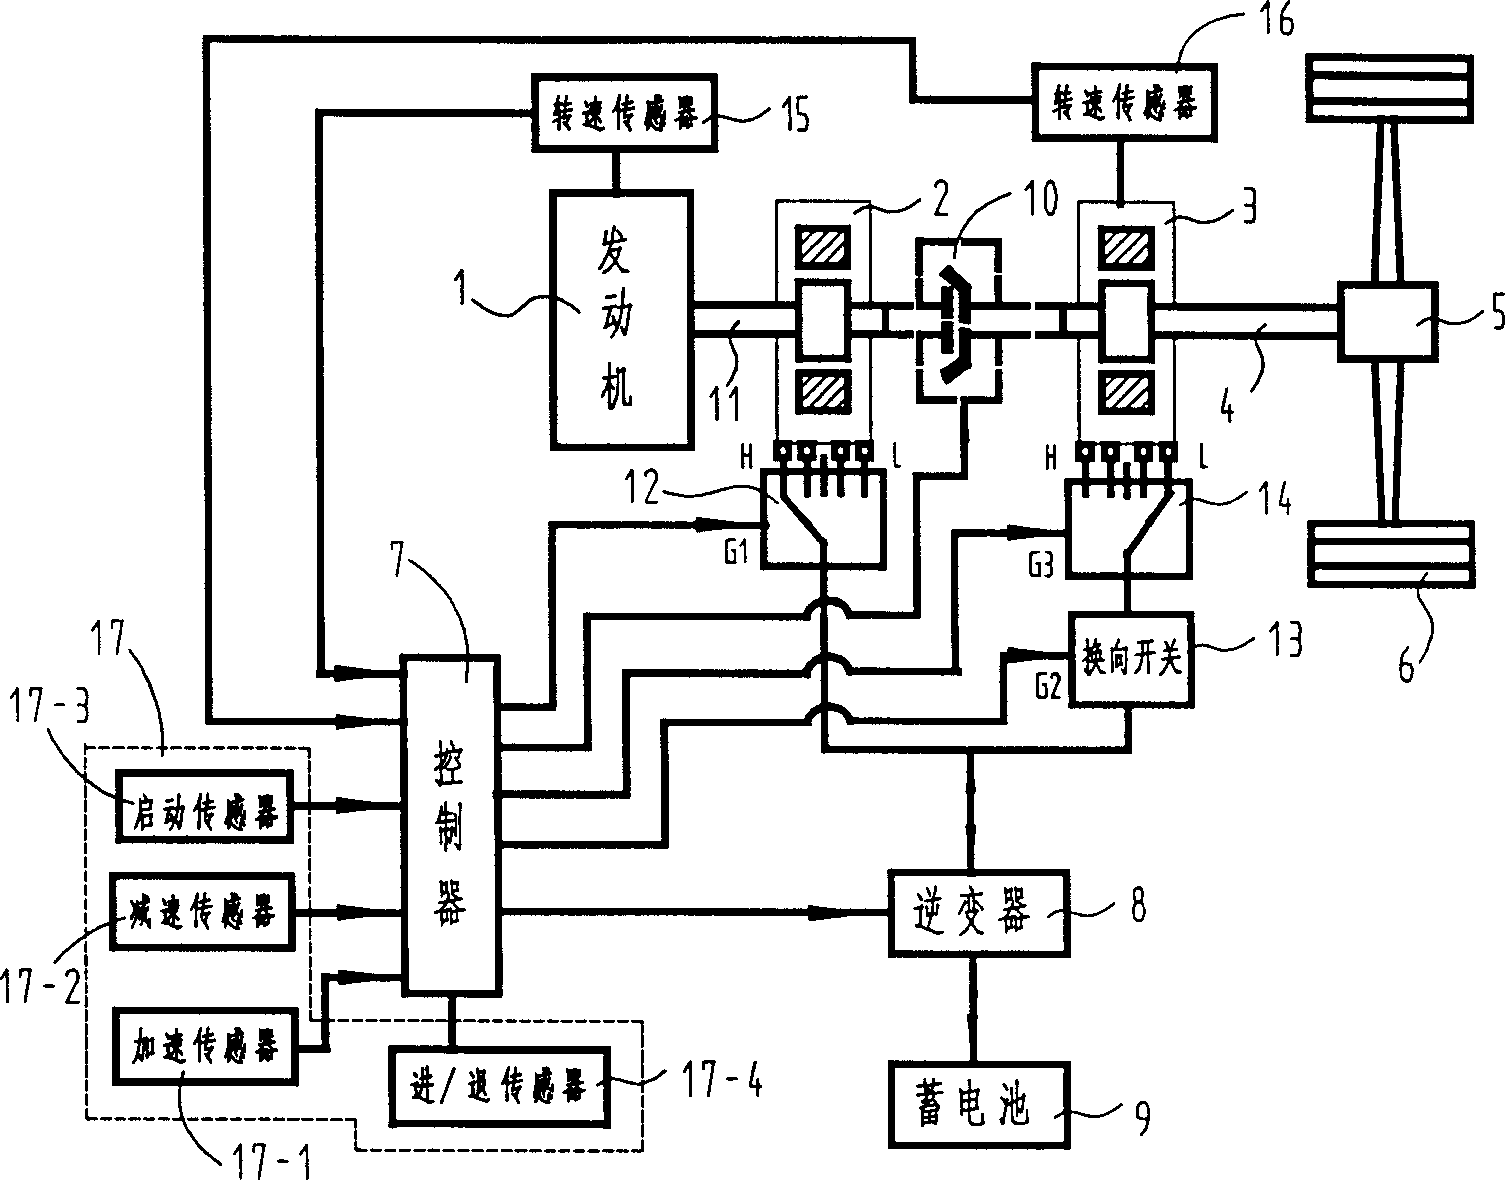 Electro-mechanic mixed driving system of automobile